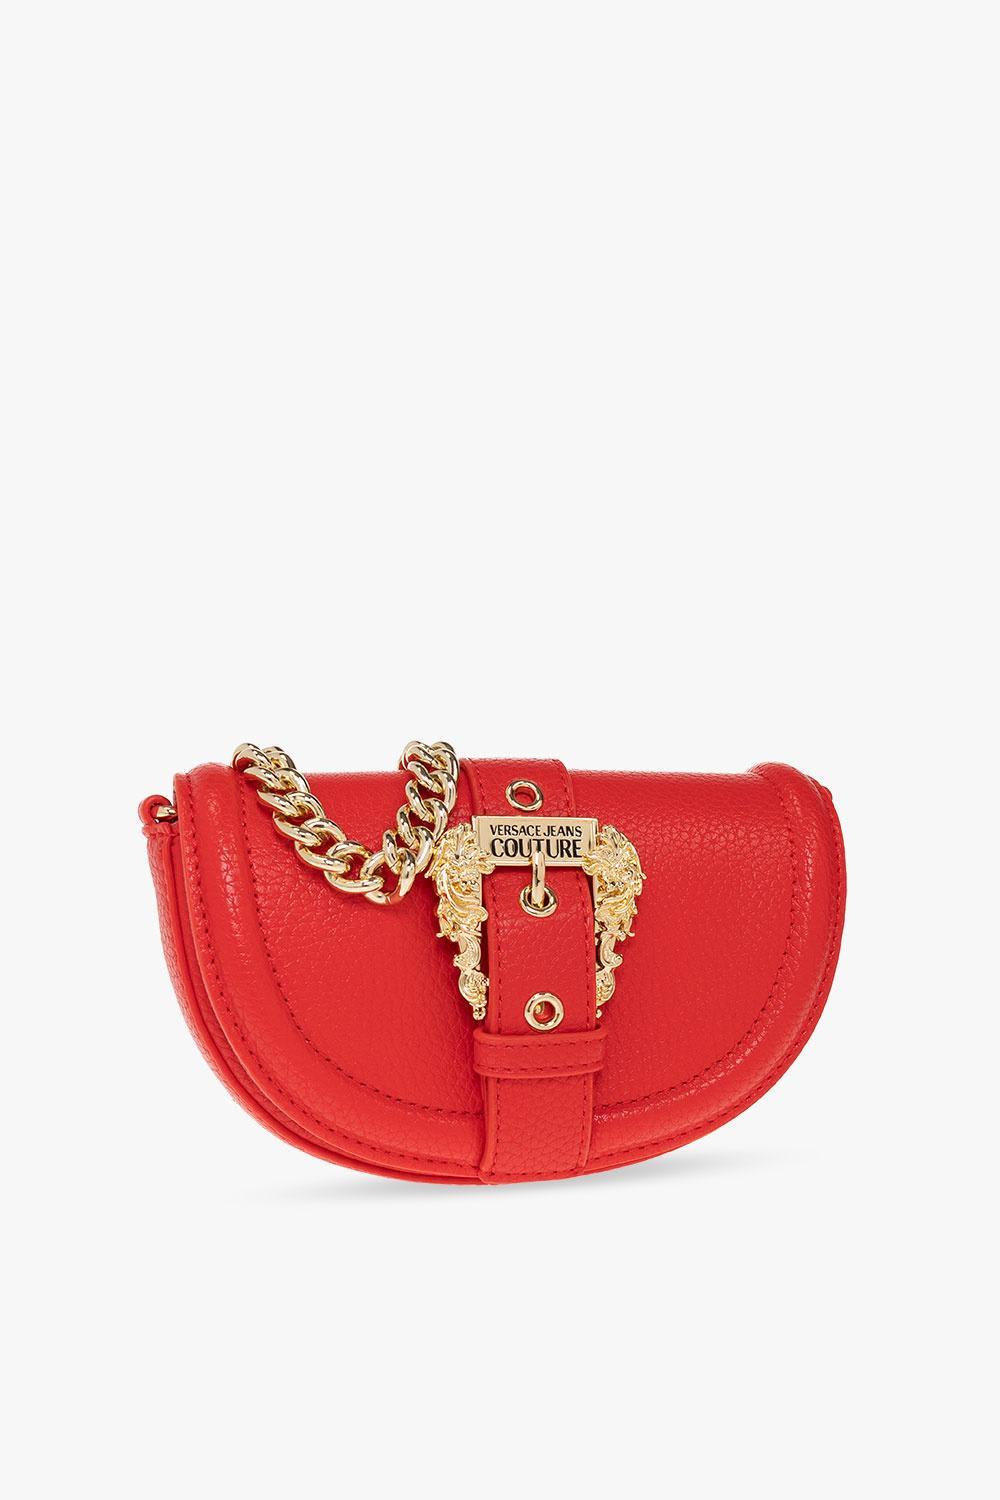 Versace Jeans Couture Shoulder Bag With Logo in Red | Lyst